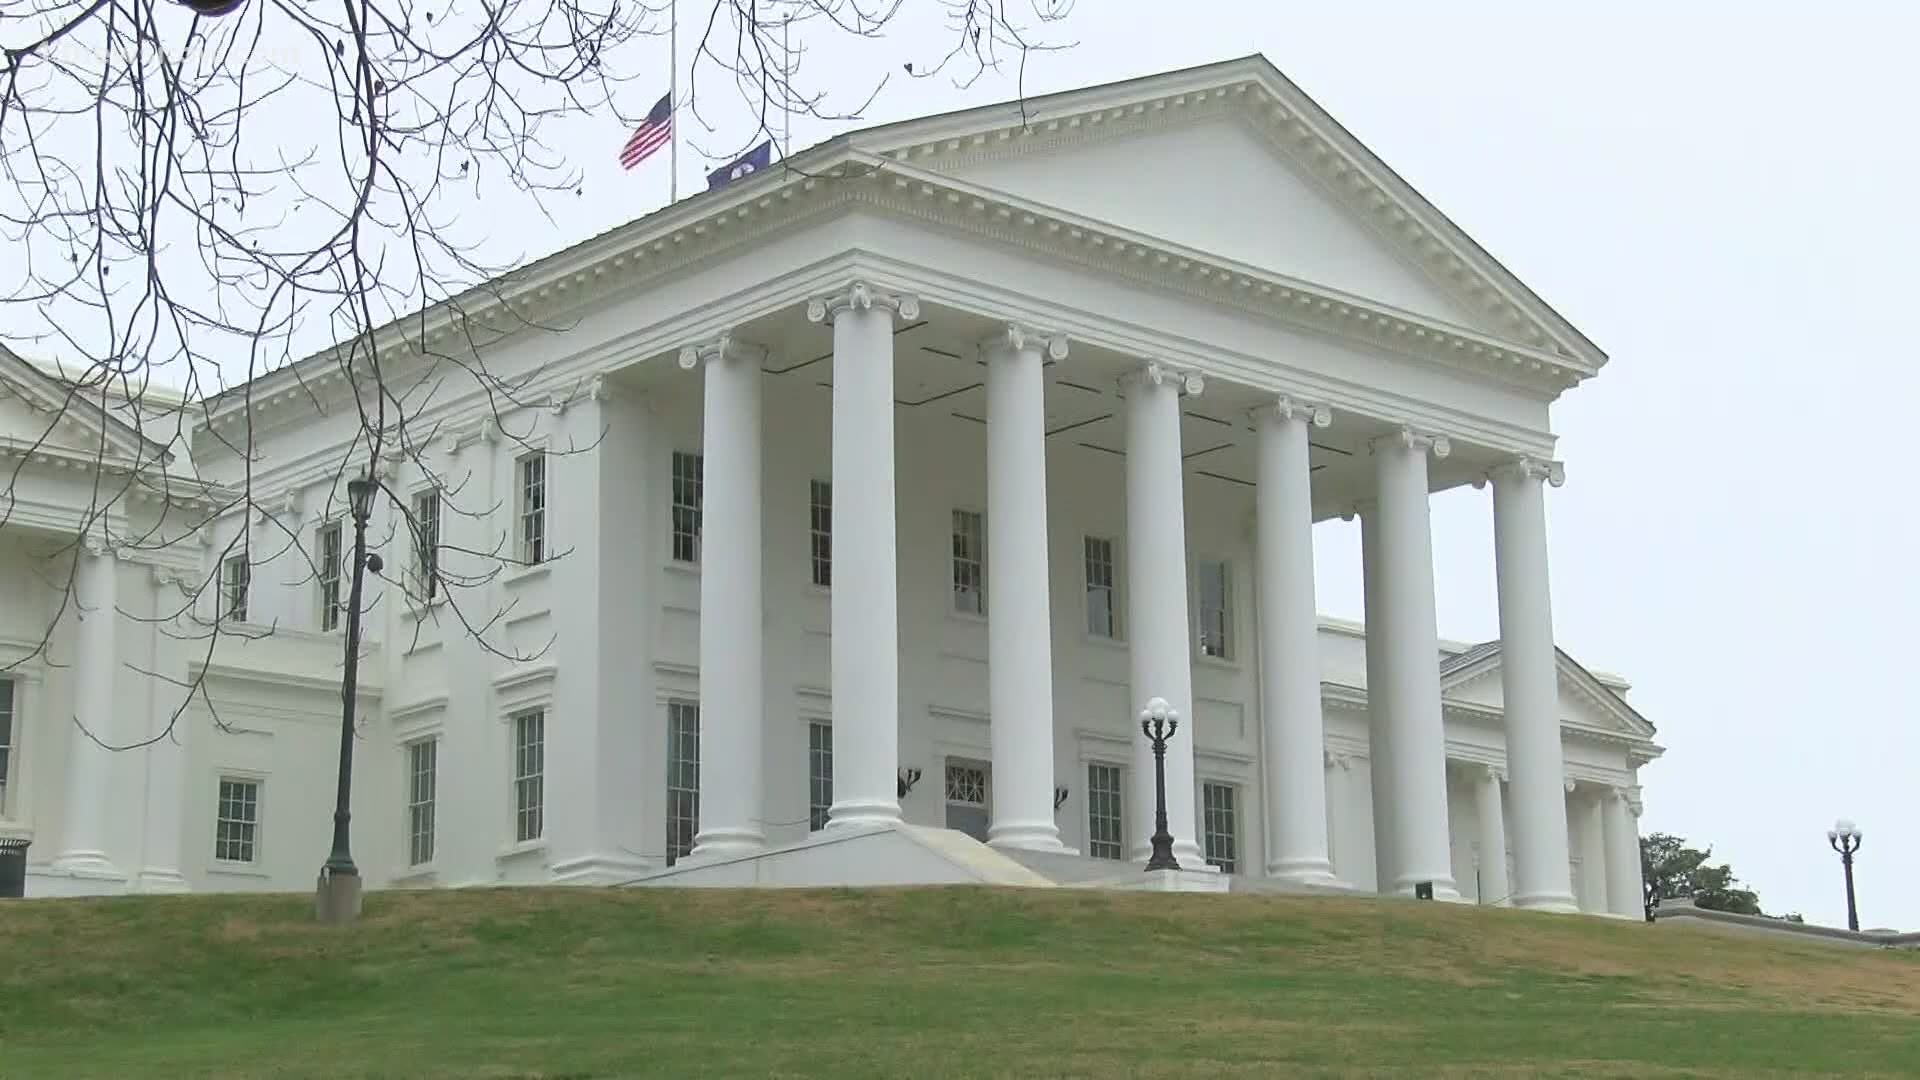 Virginia is in the middle of a two-year budget, and while that typically means a shorter session for lawmakers, the past year has been anything but typical.